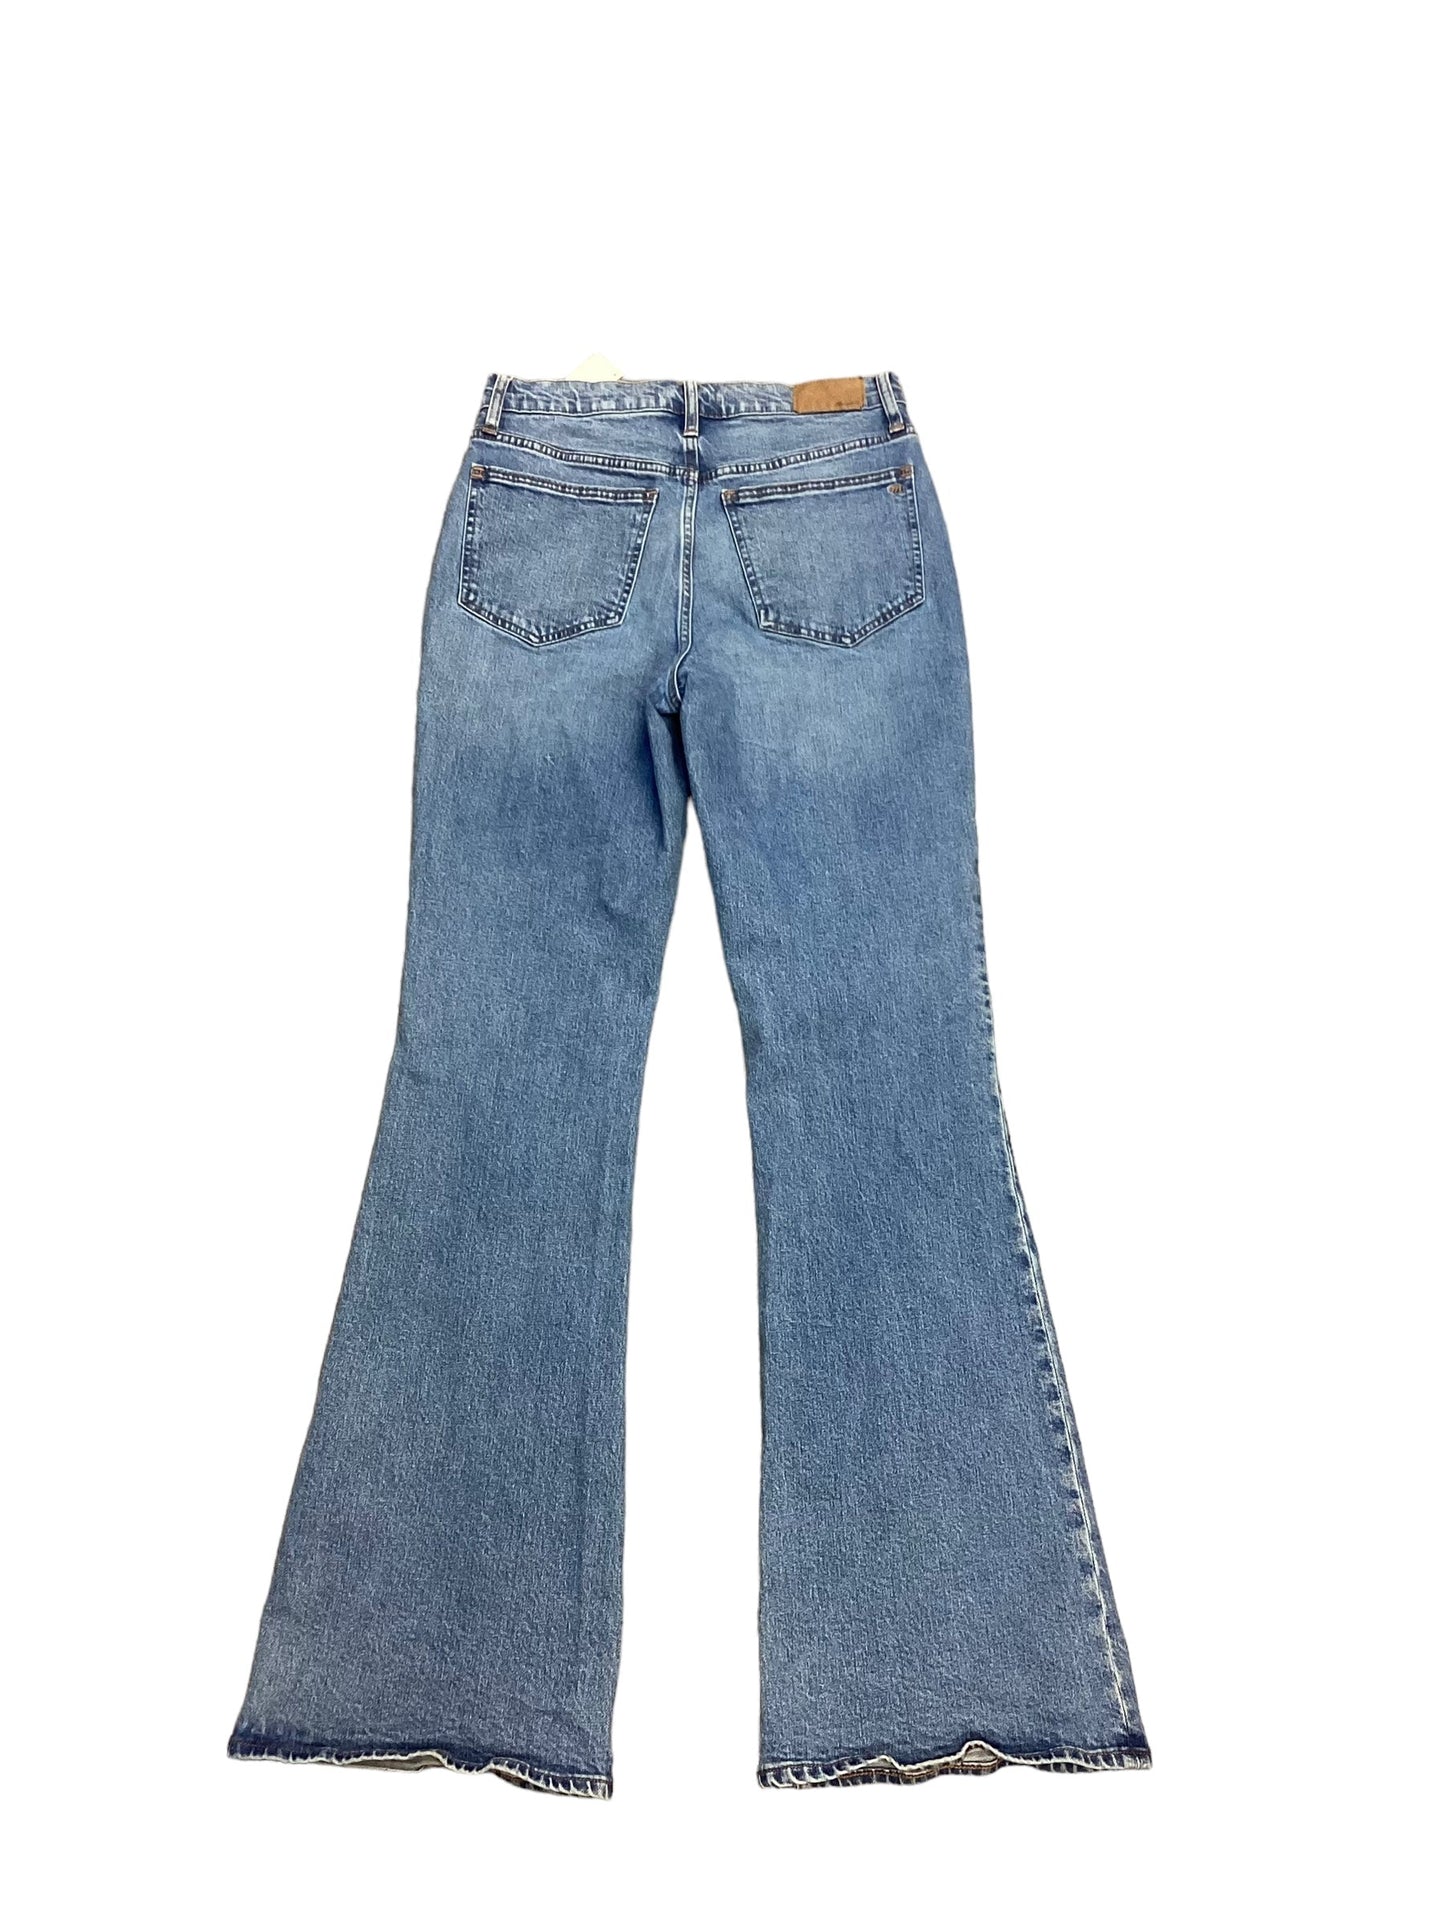 Blue Denim Jeans Flared Madewell, Size 6